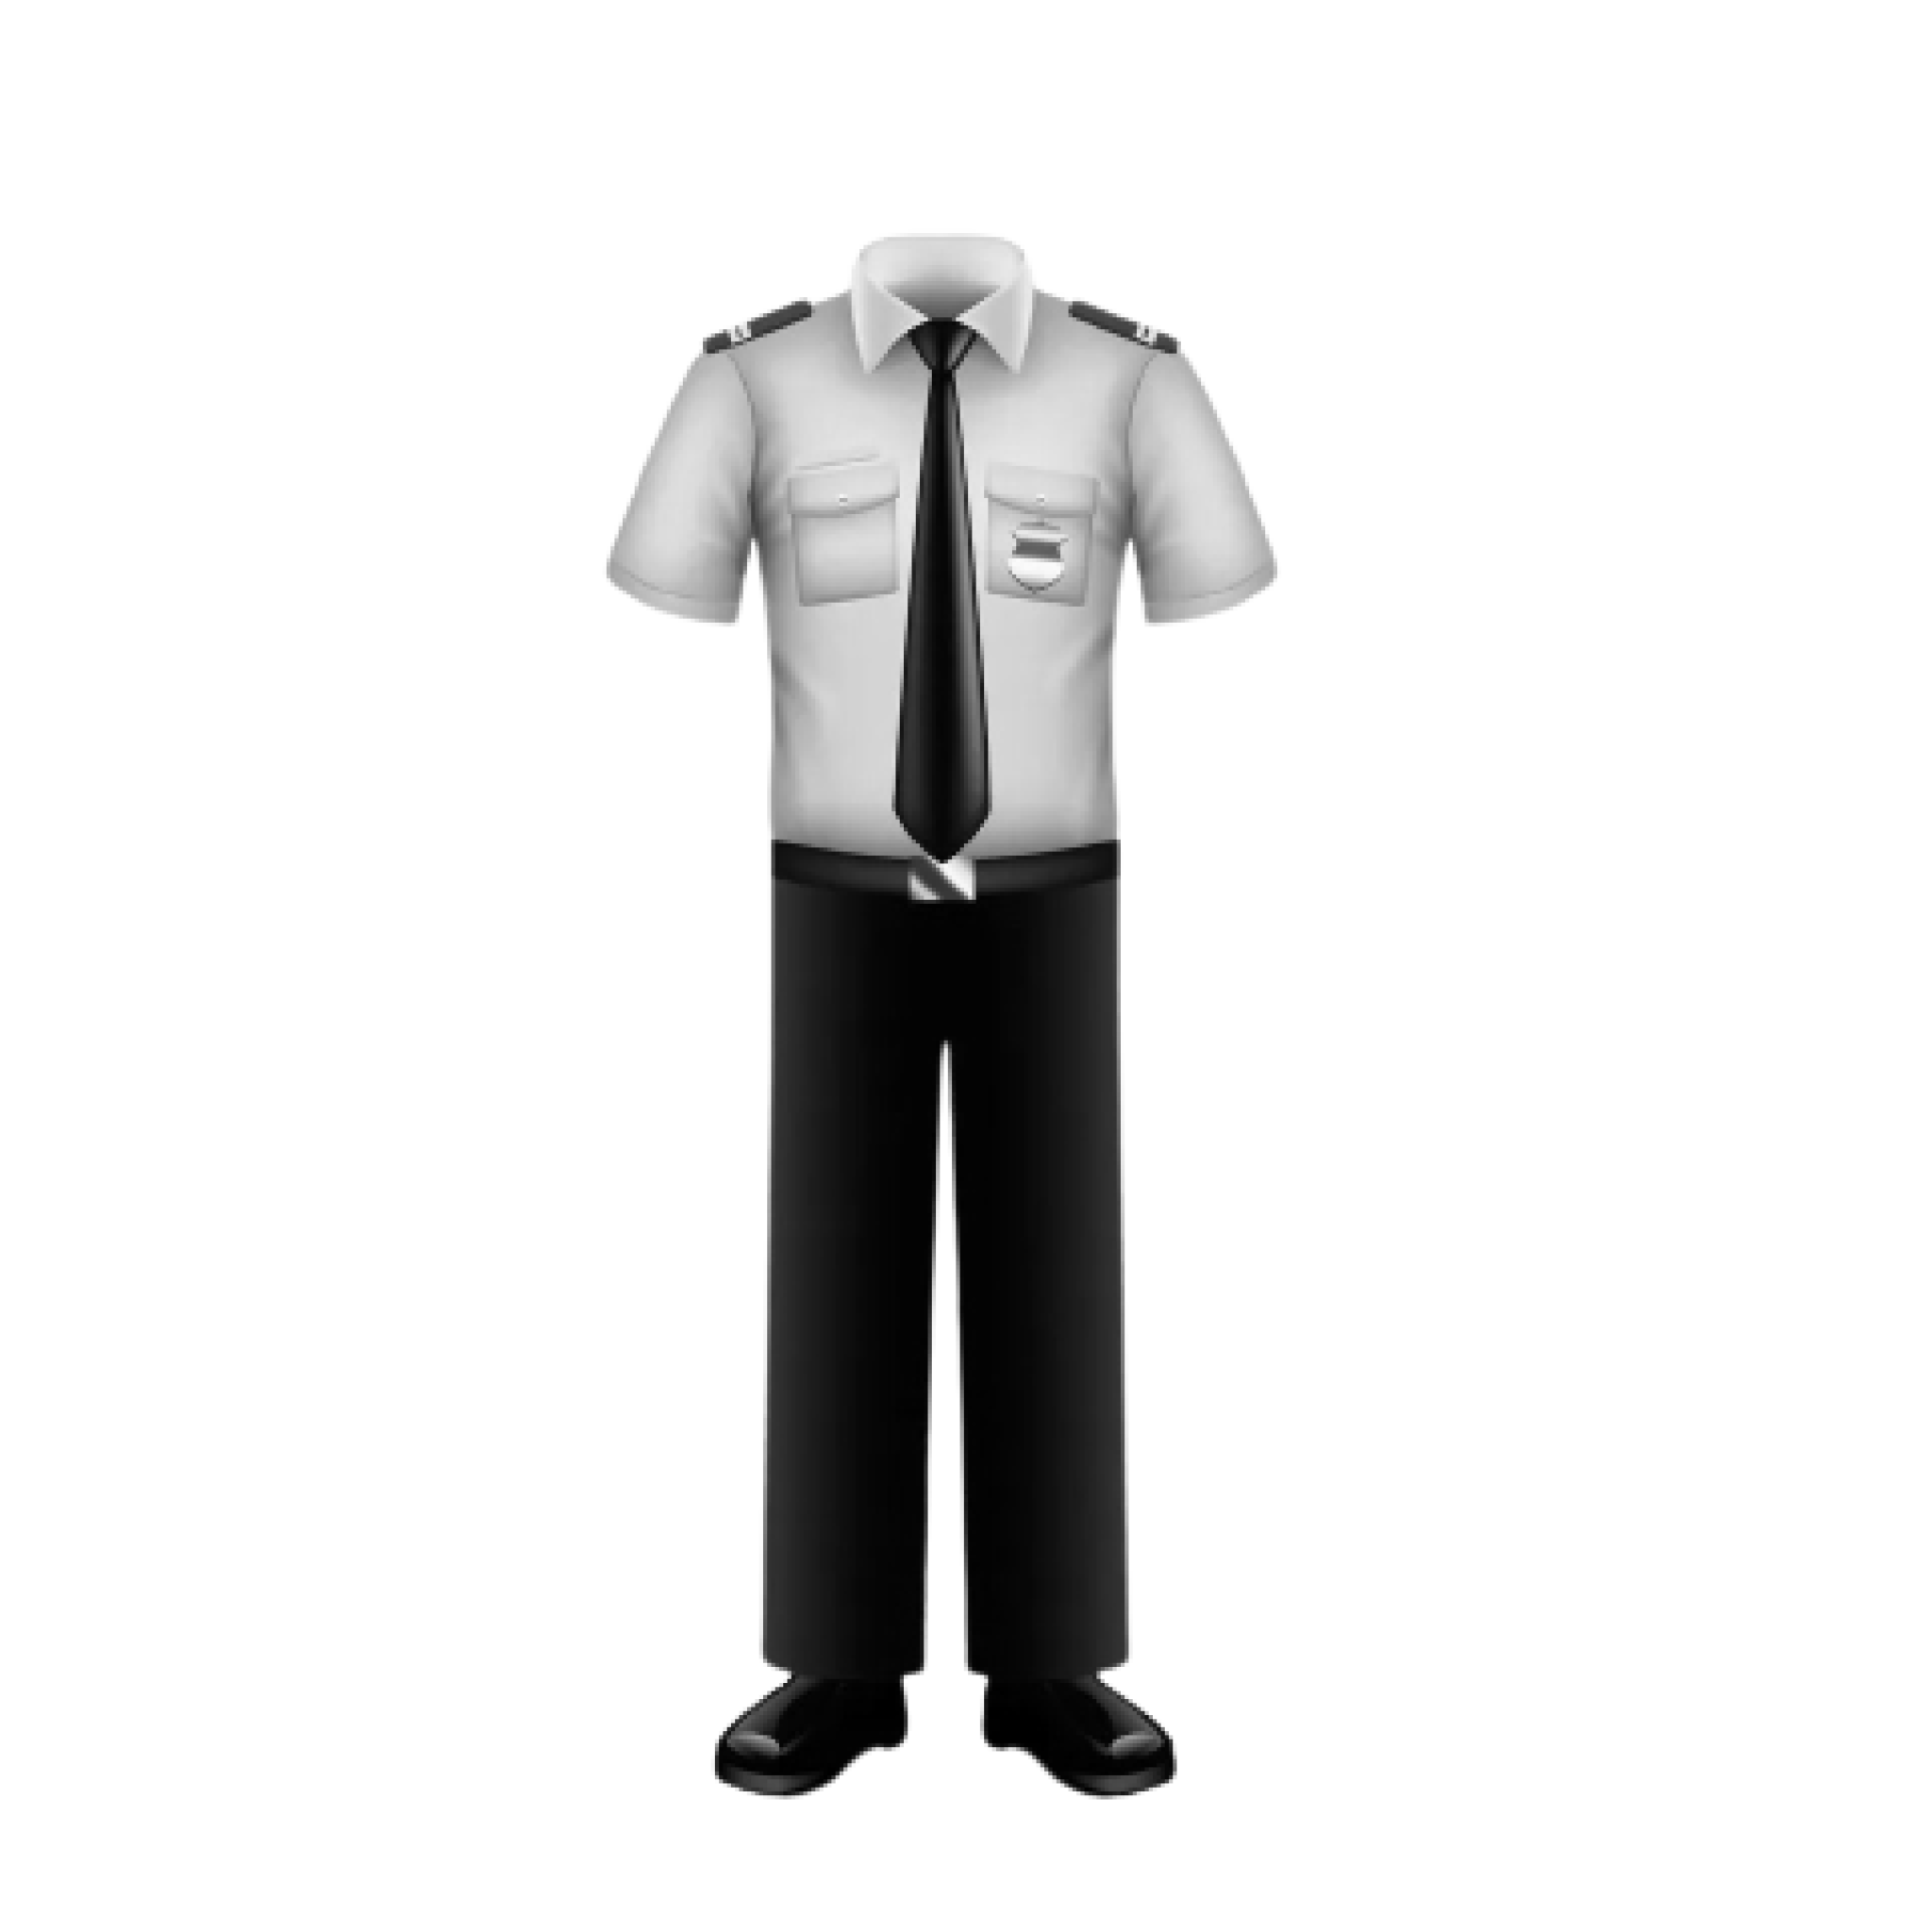 police-uniform-isolated-on-white-vector-13579159-removebg-preview